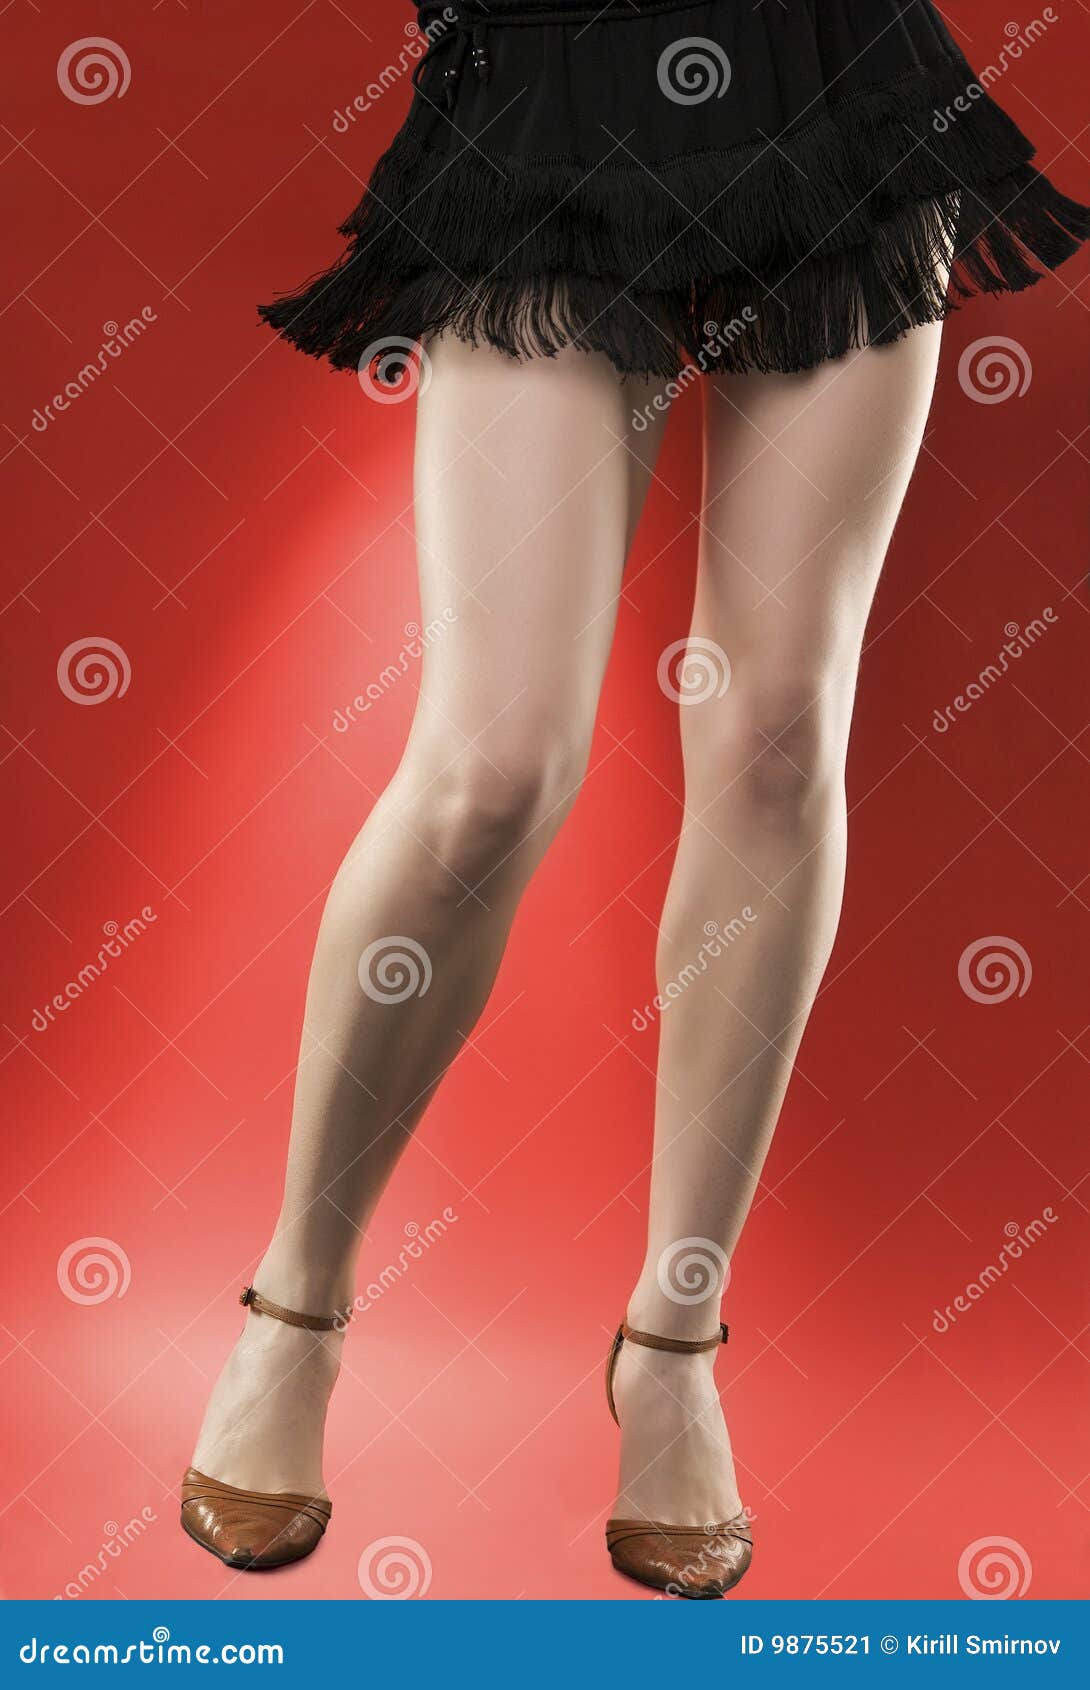 Woman S Long Legs on a Red Background Stock Image - Image of attractive ...